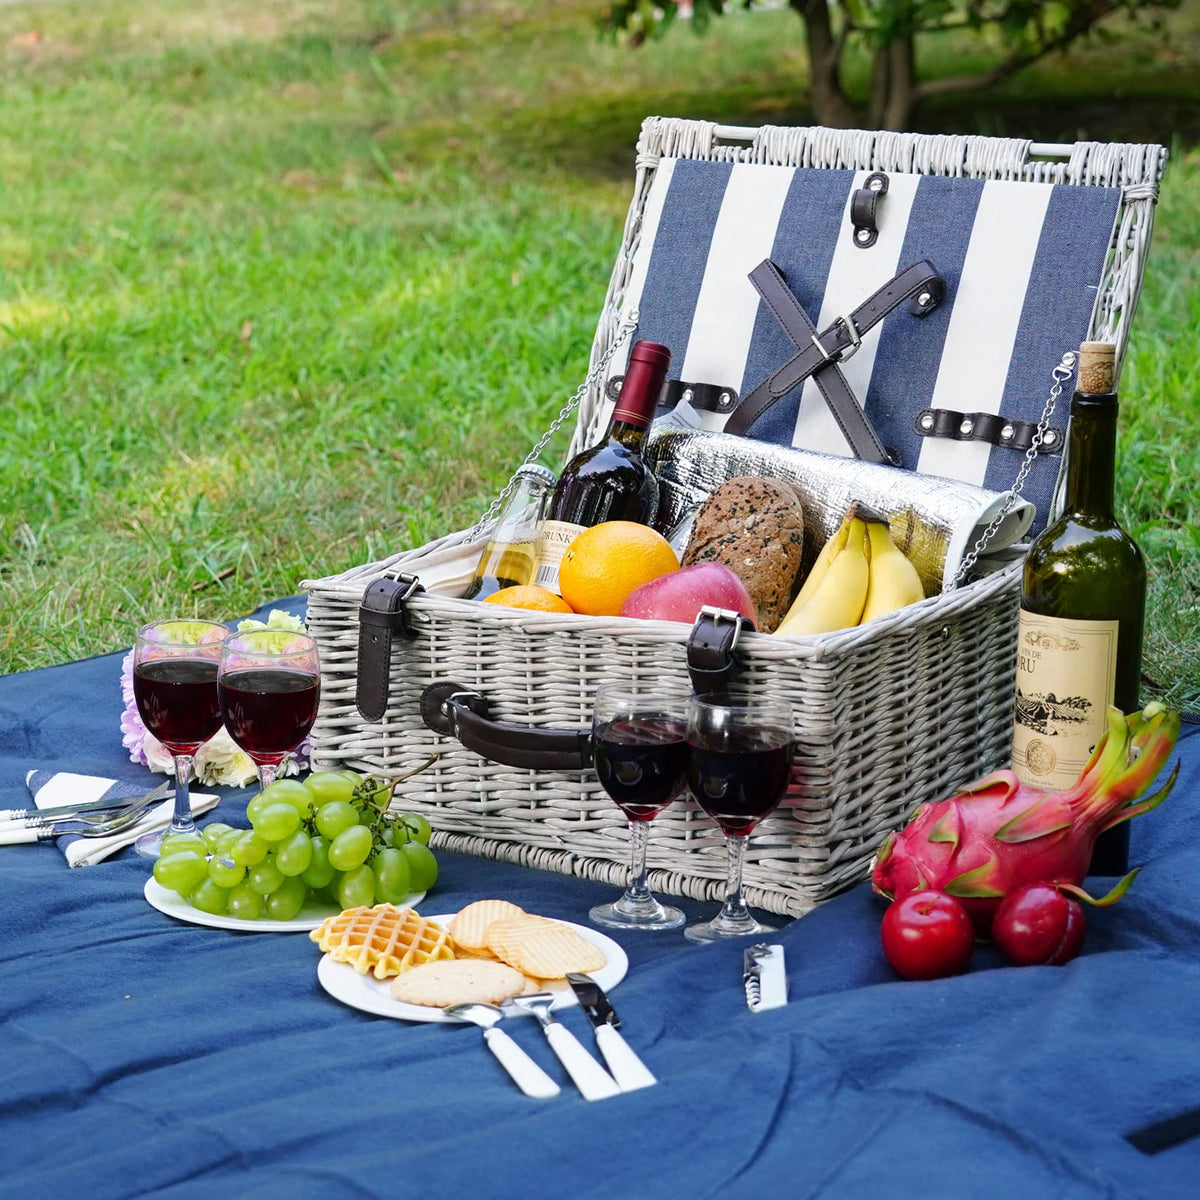 Wicker Picnic Basket Sets for 4 Persons-Grayish White